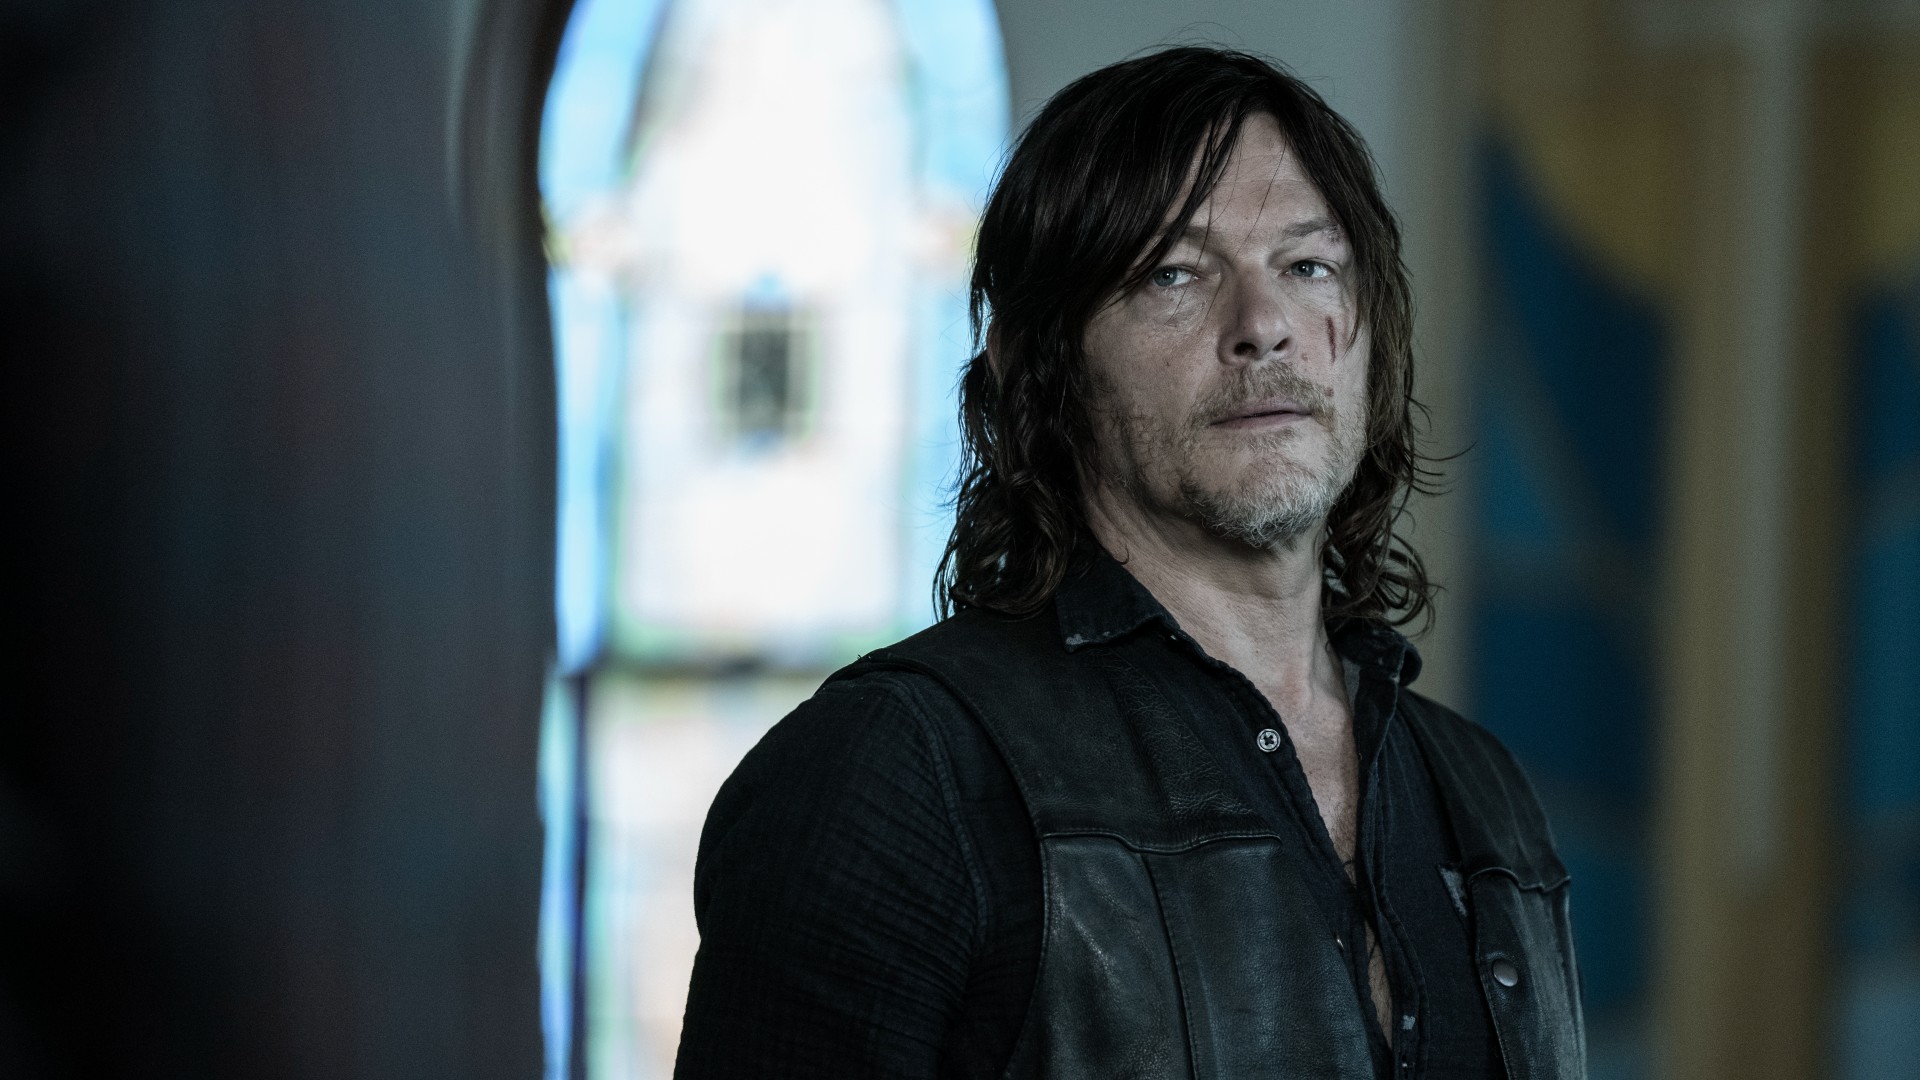 Norman Reedus says Daryl spin-off will be tonally very different from The Walking Dead